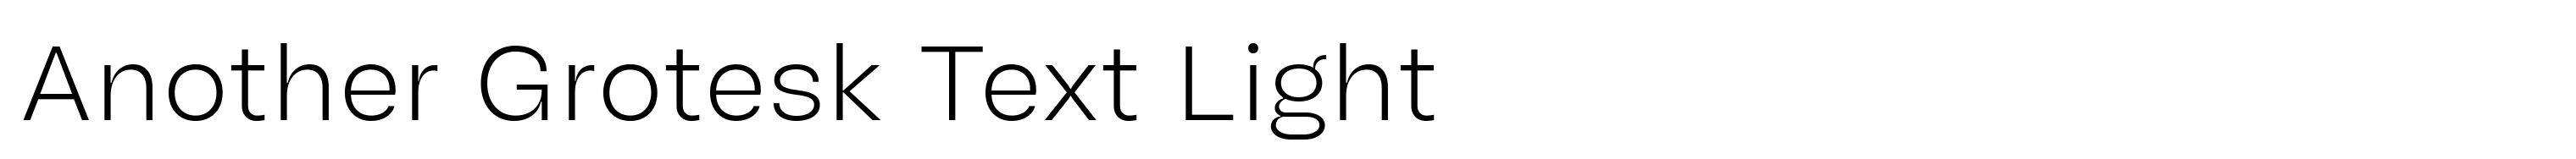 Another Grotesk Text Light